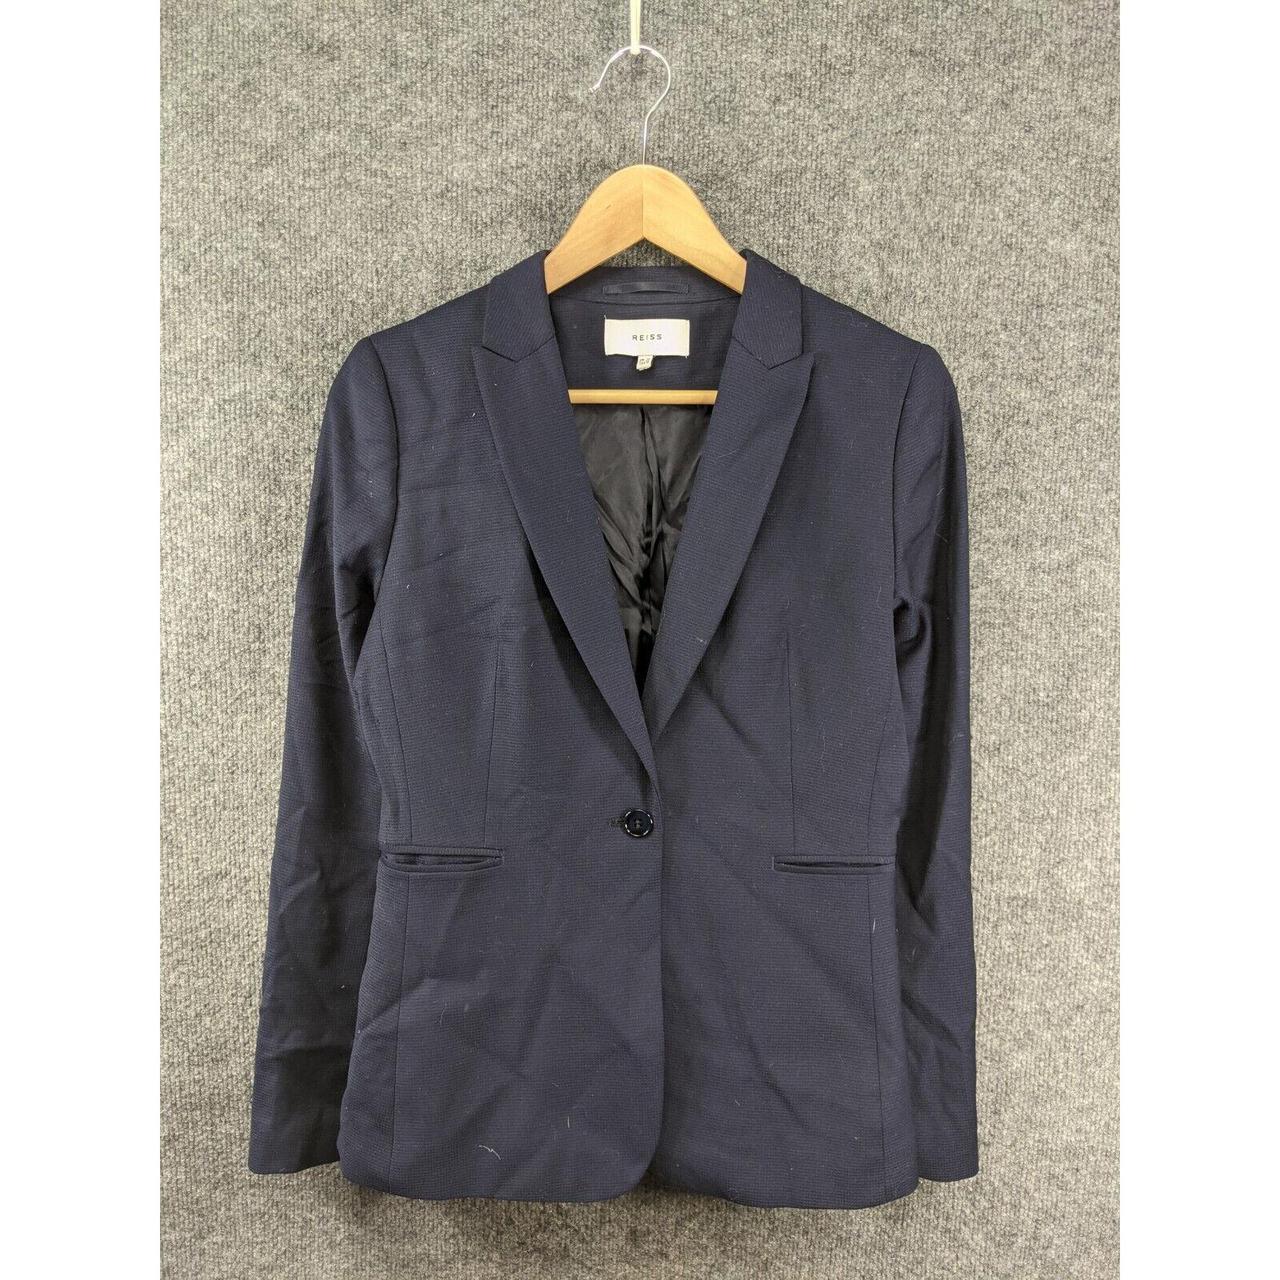 Reiss Women's Blue and Navy